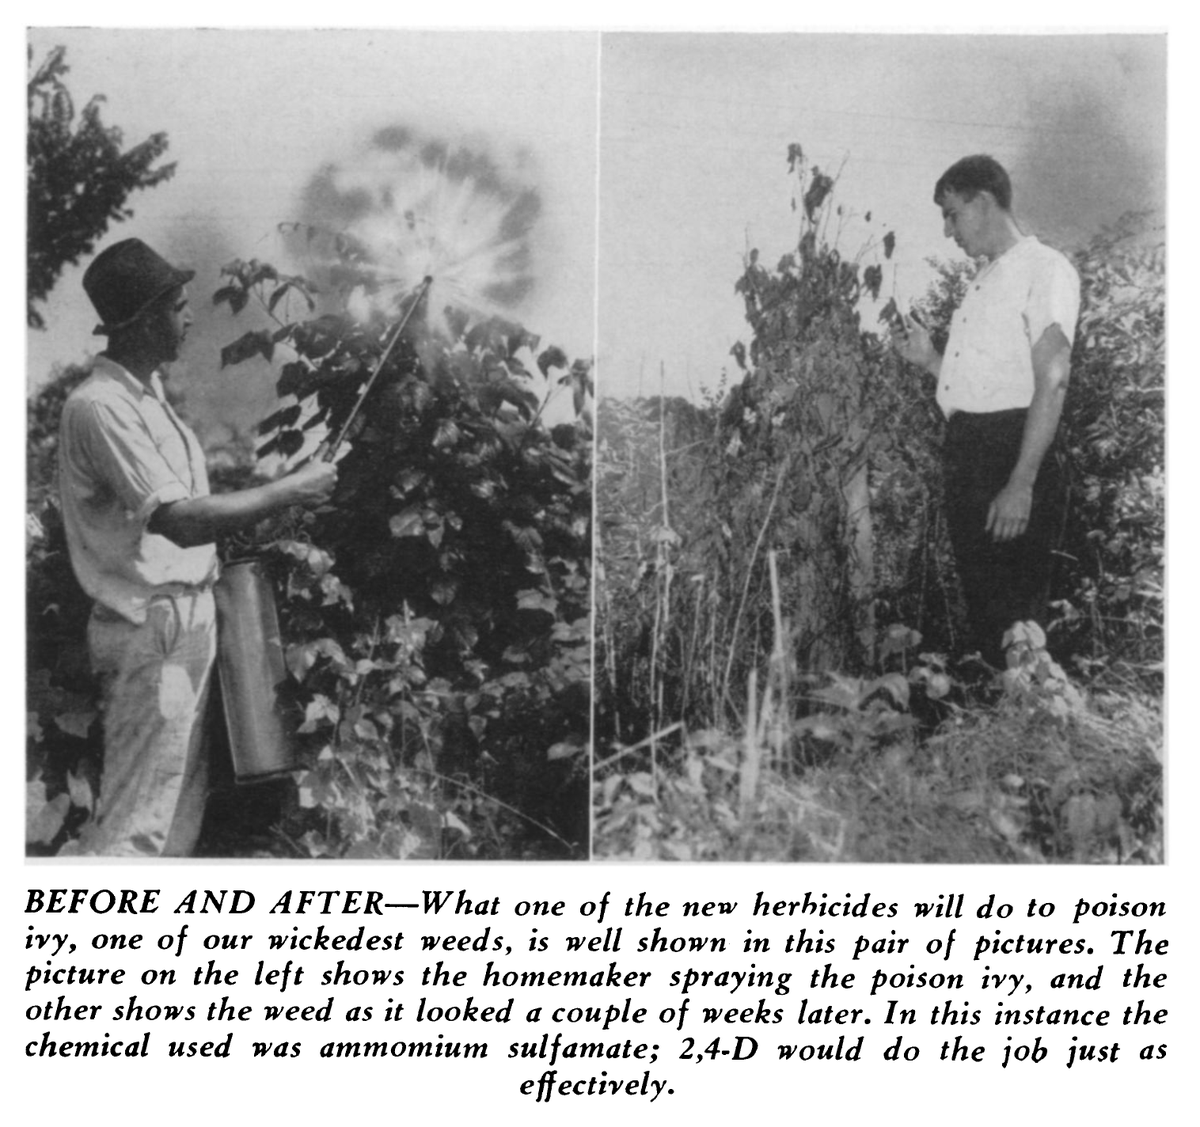 Daily  #victorygarden content:Speaking of things that are dangerous chemicals that will NOT cure corona virus and are NOT safe for human digestion, here are some images related to World War II pesticides! #envhist  #foodhist  #aghist  #garden